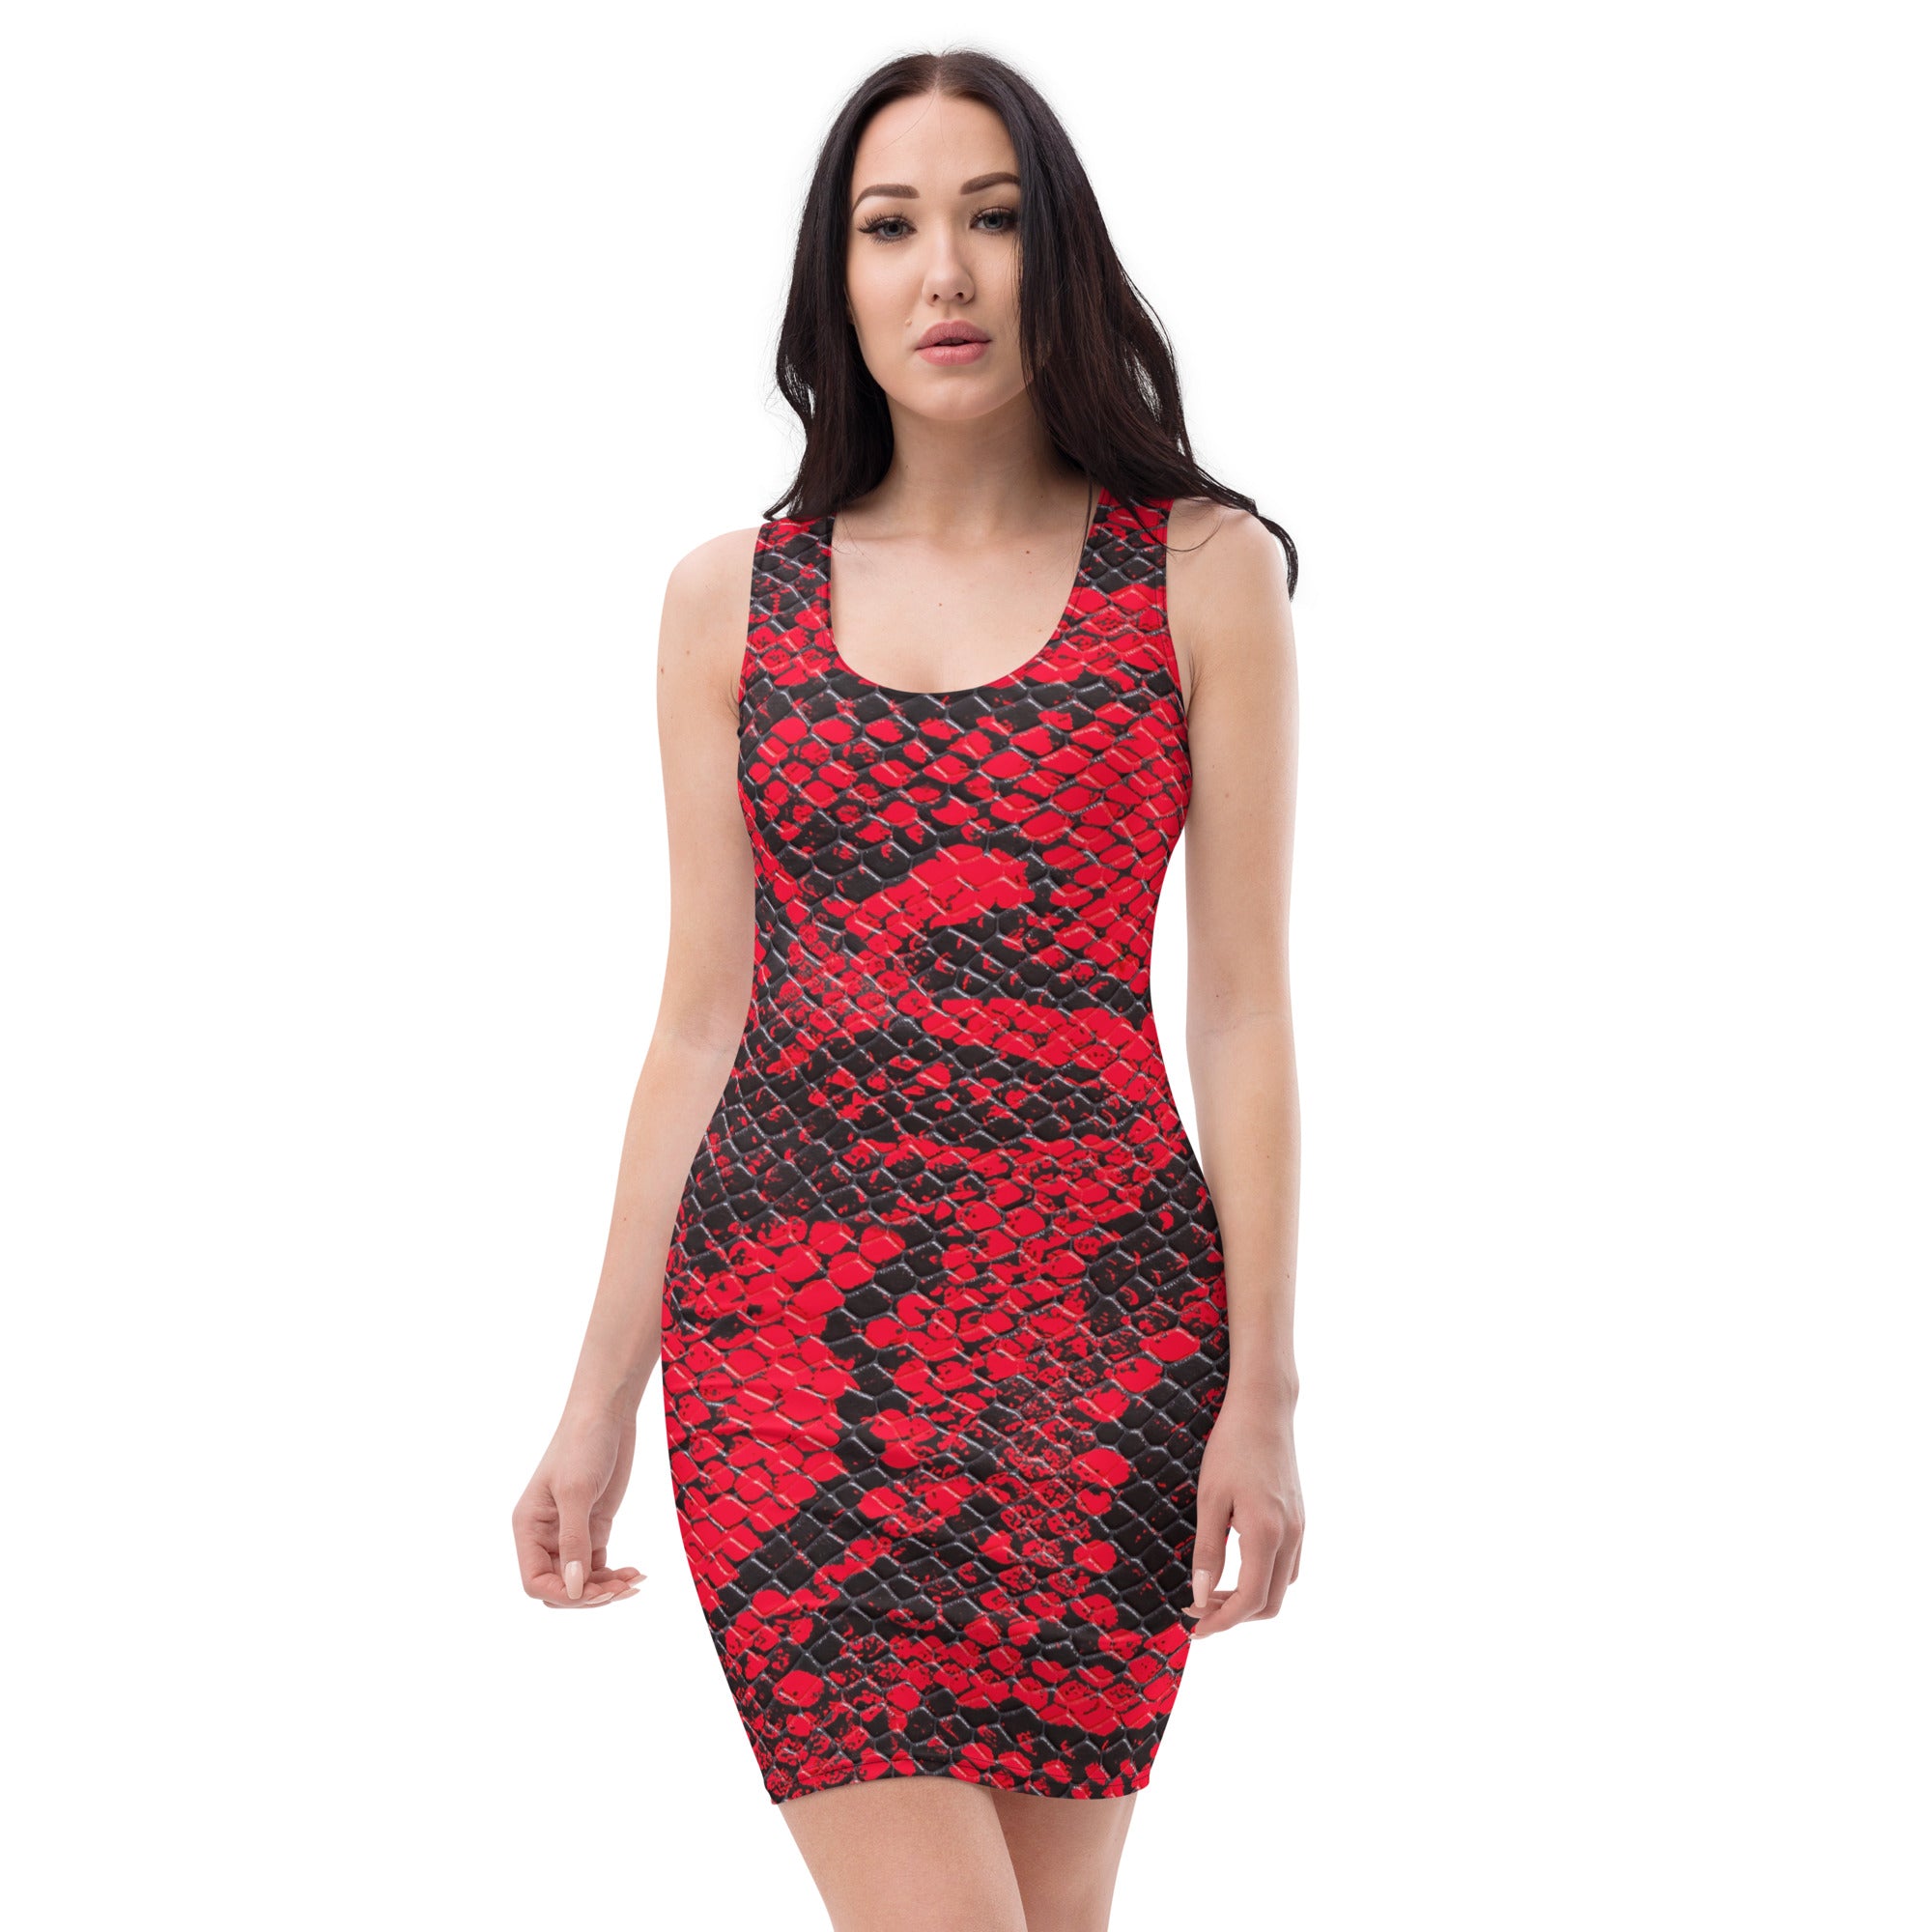 "Scarlet Serpentine Seduction: Red Snakeskin Fitted Dress", lioness-love